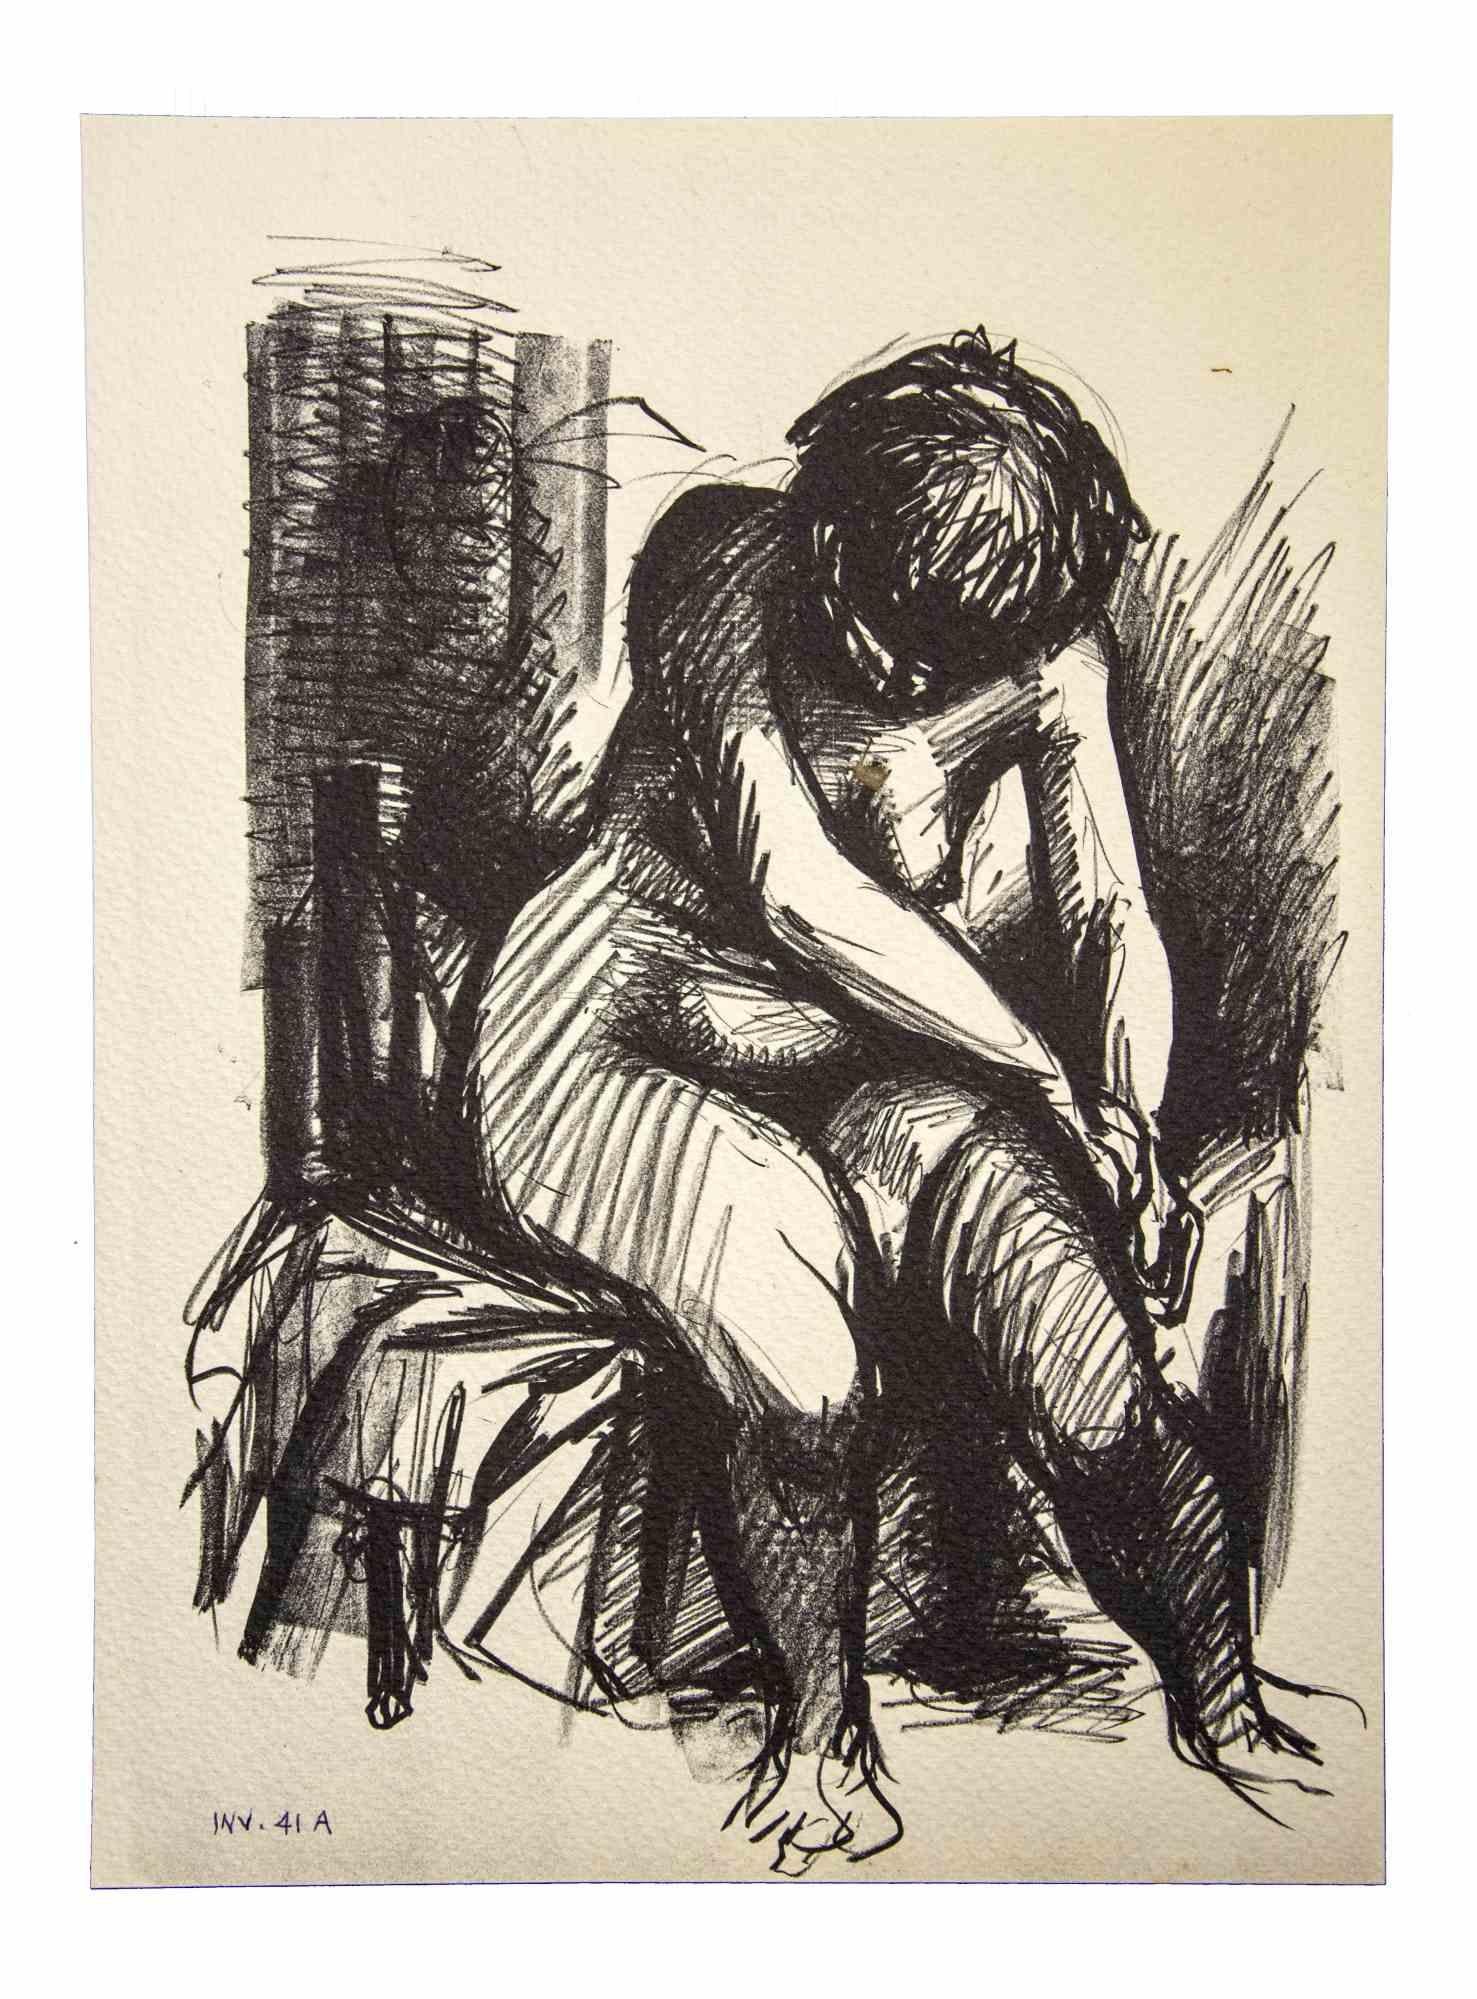 Crouched Nude is an original drawing in black marker pen on cardboard realized by Leo Guida in the 1980s.

Very Good condition.

 Leo Guida (1992 - 2017). Sensitive to current issues, artistic movements and historical techniques, Leo Guida has been